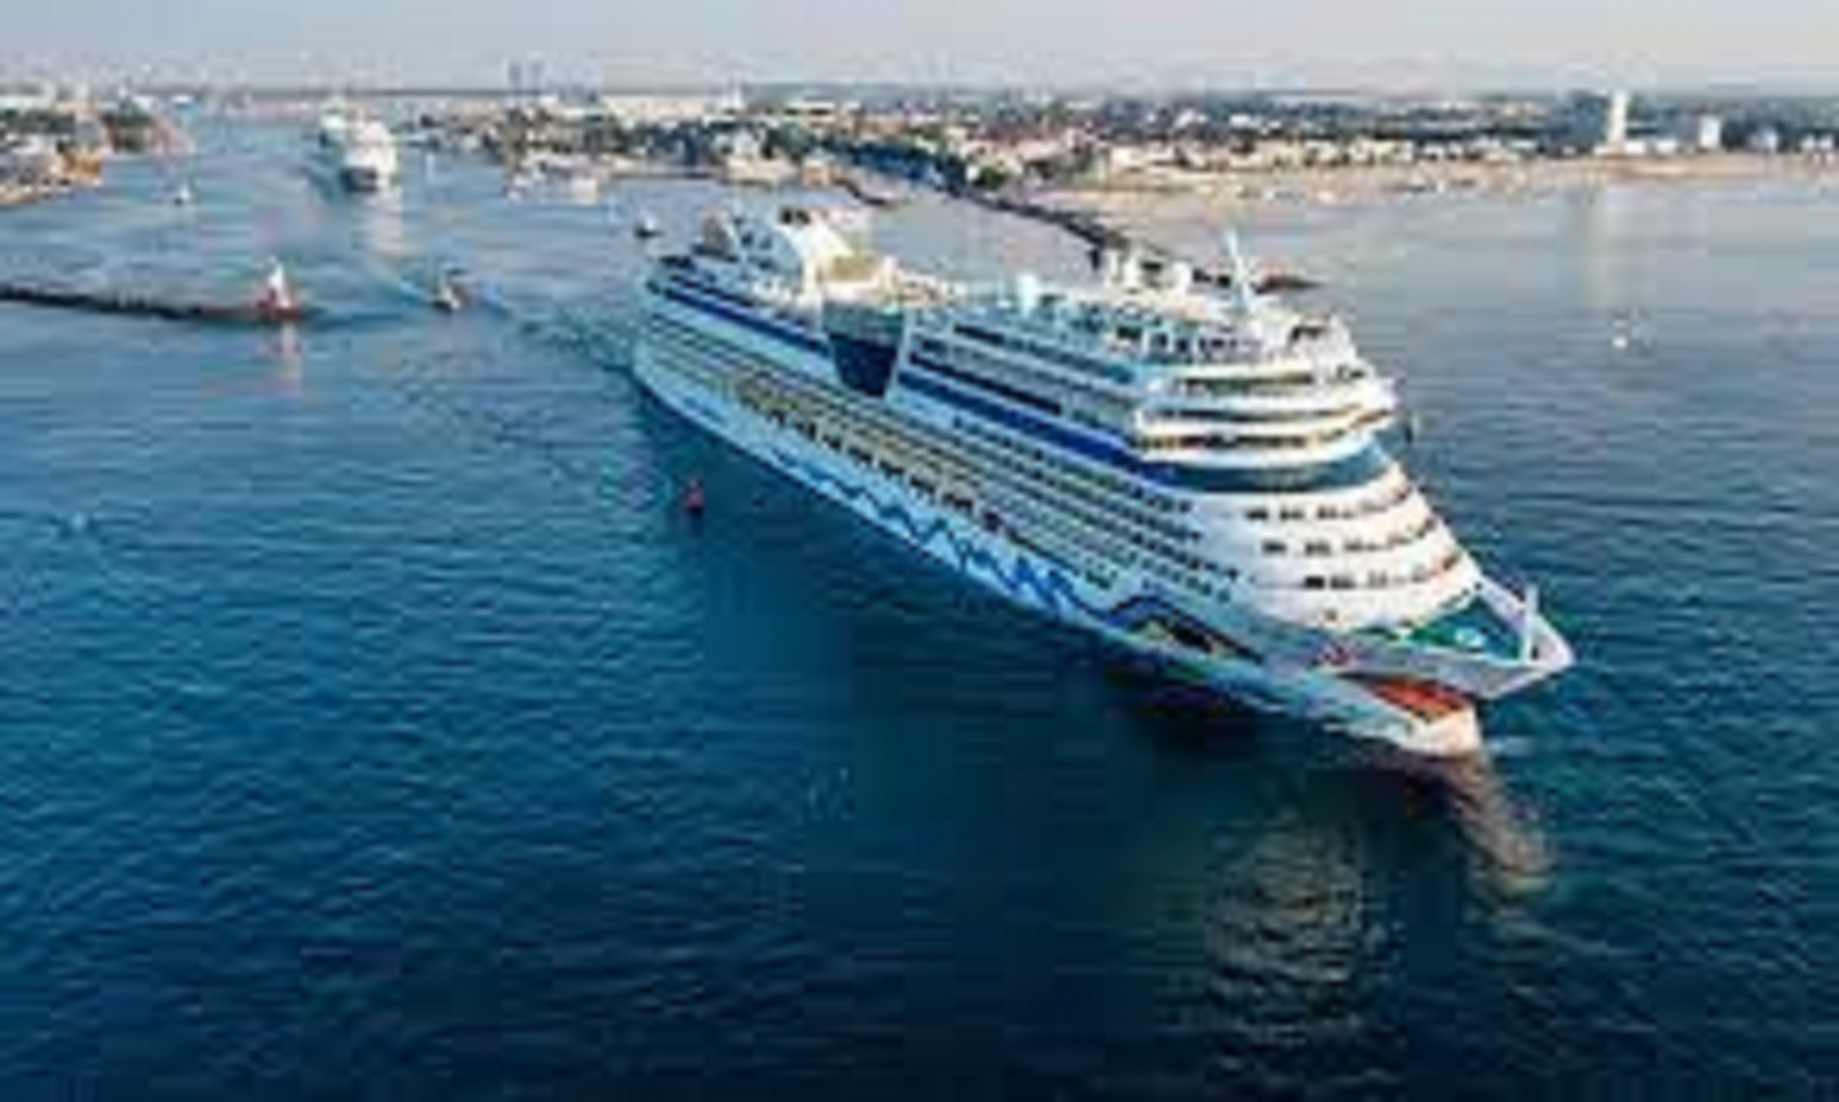 India To Set Up Three Cruise Training Academies To Address Talent Issues